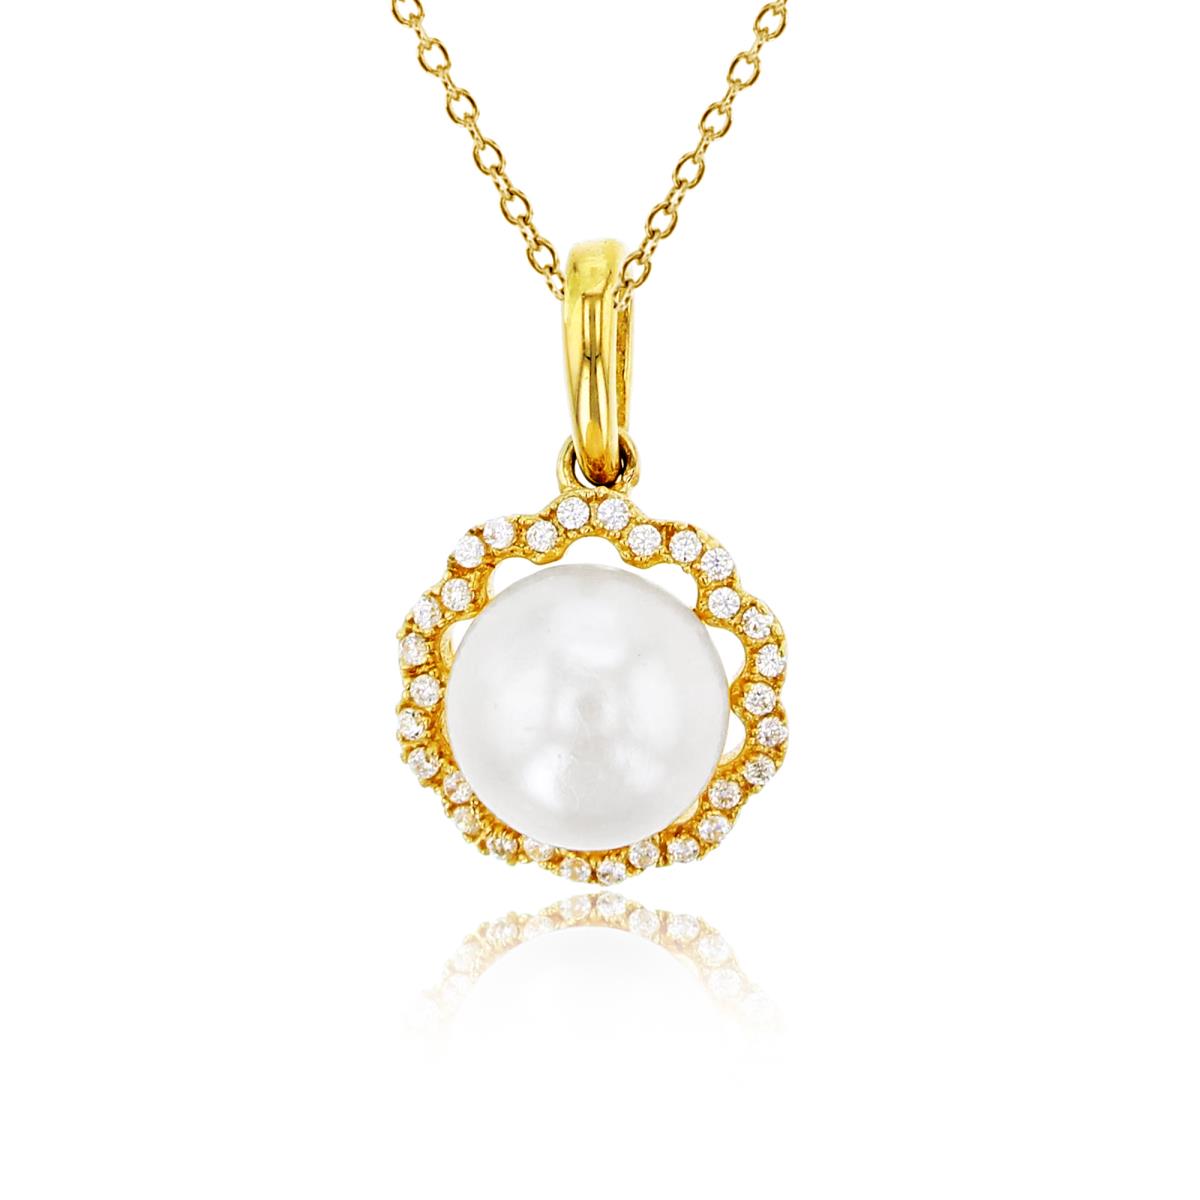 10K Yellow Gold 0.10 CTTW Rnd Diamonds & 7mm Rnd White Pearl Flower 18"Necklace